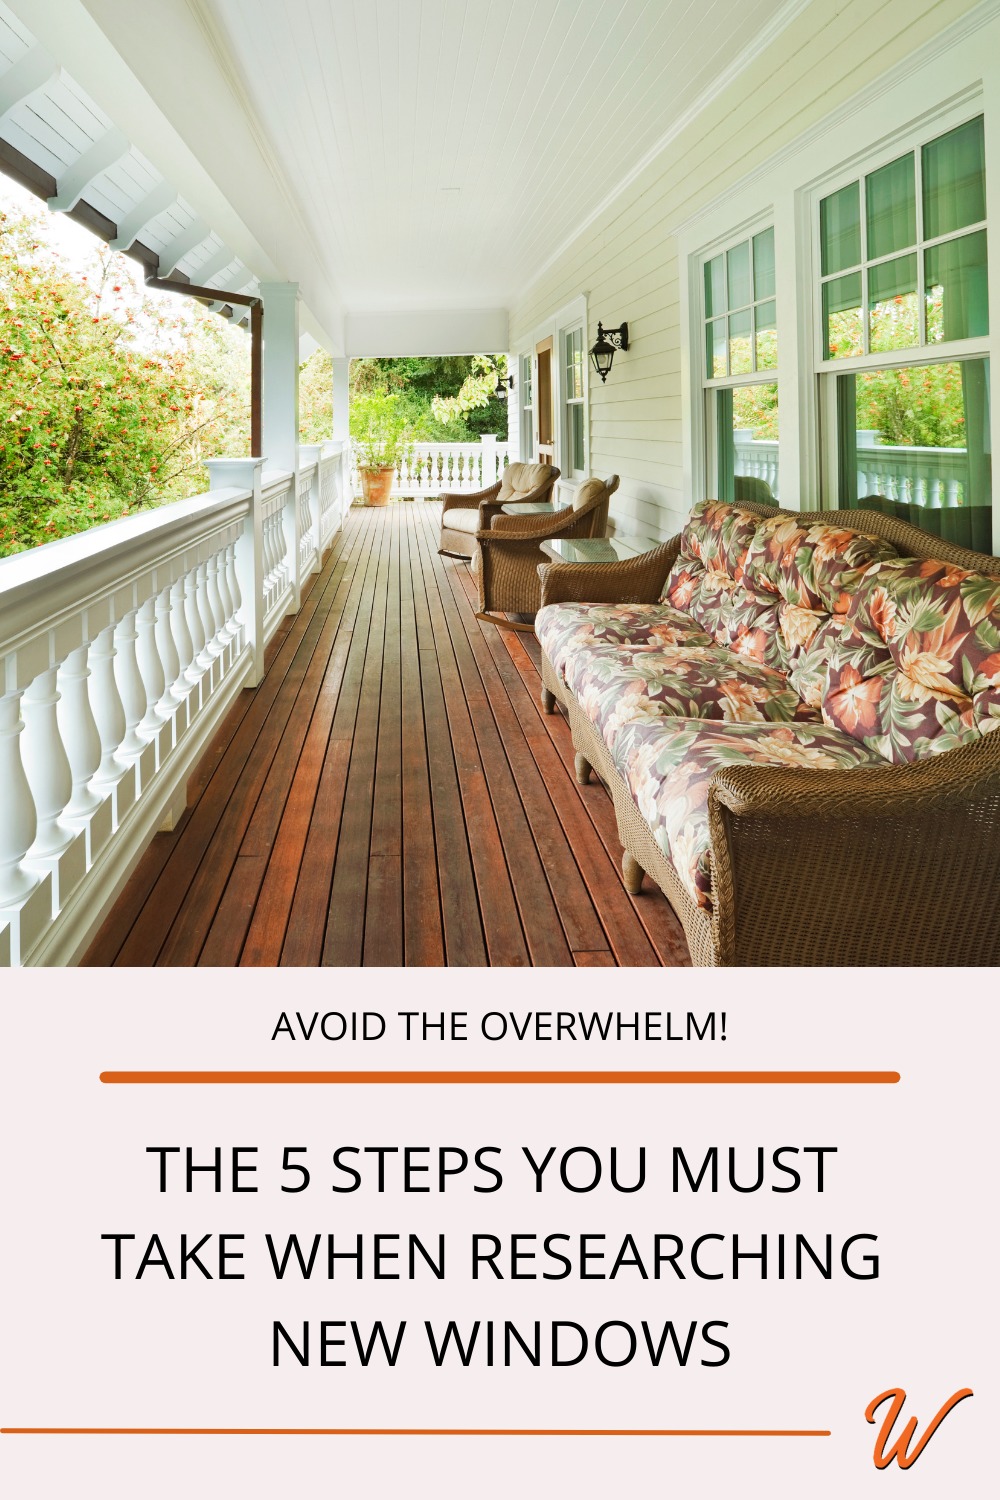 Front porch with Southern decor and white double hung windows captioned with 'Avoid the overwhelm! The 5 steps you must take when researching replacement windows'